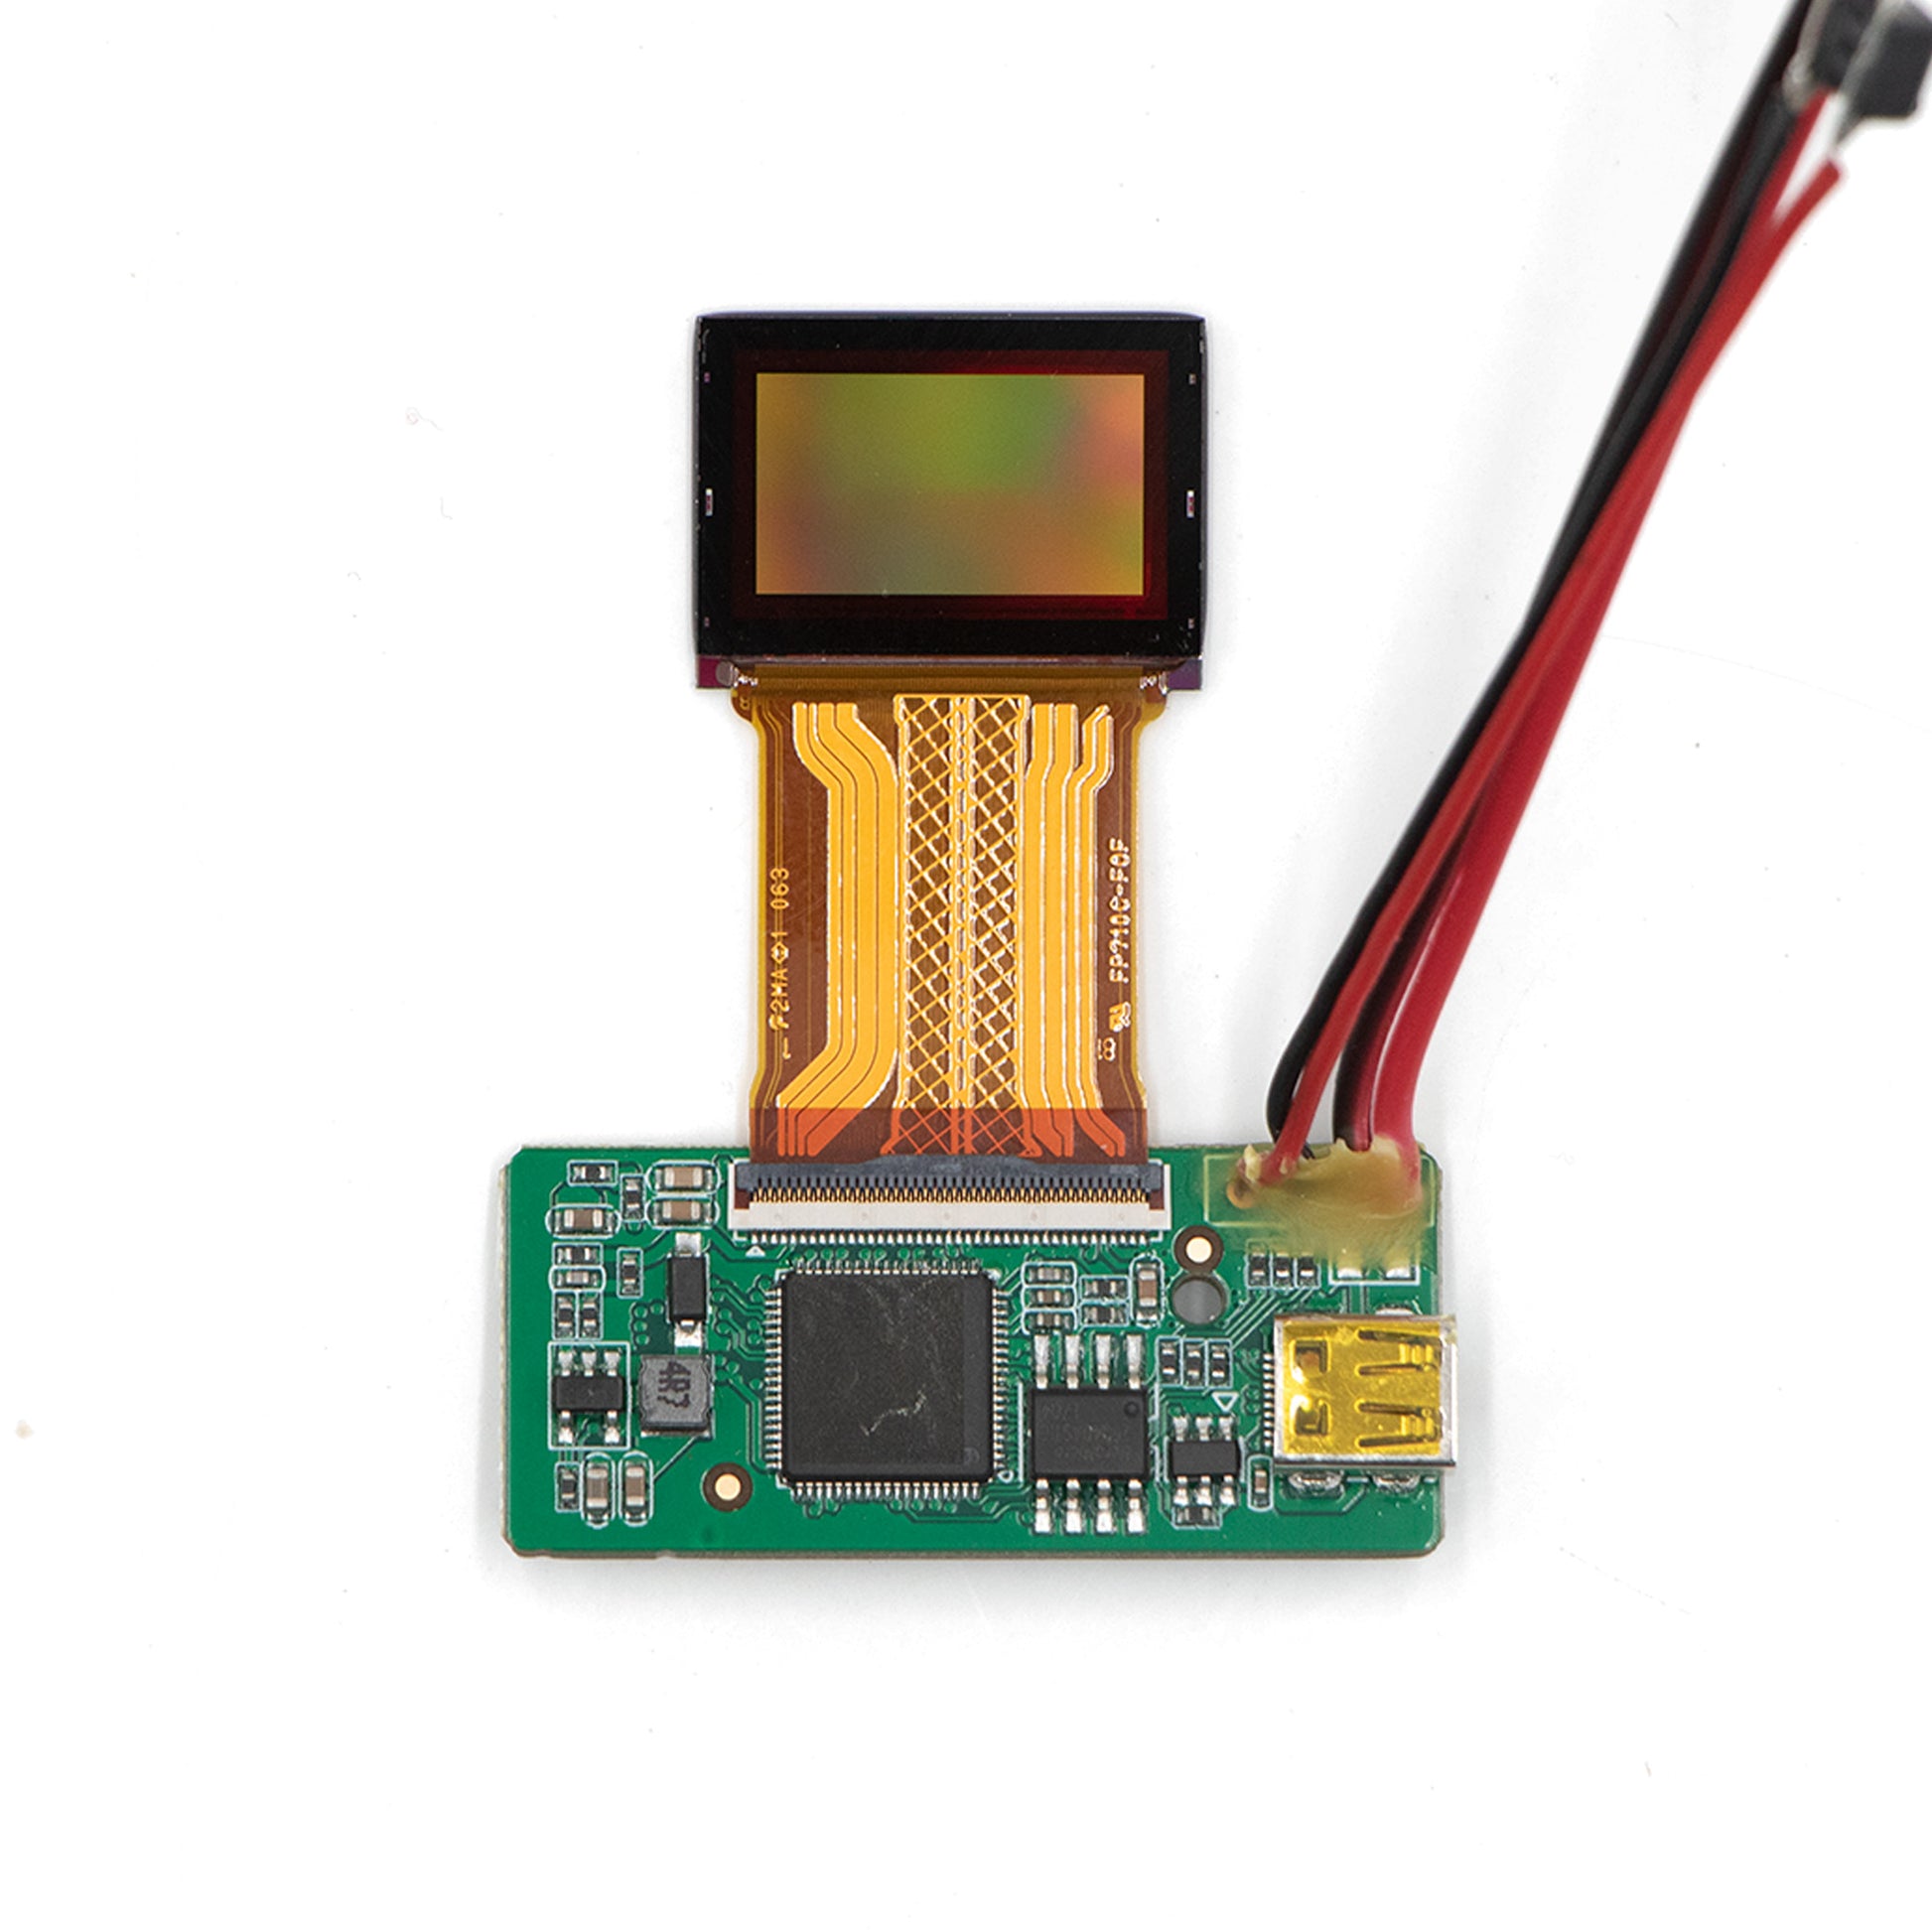 A single 0.7-inch micro OLED display panel connected to a driver board